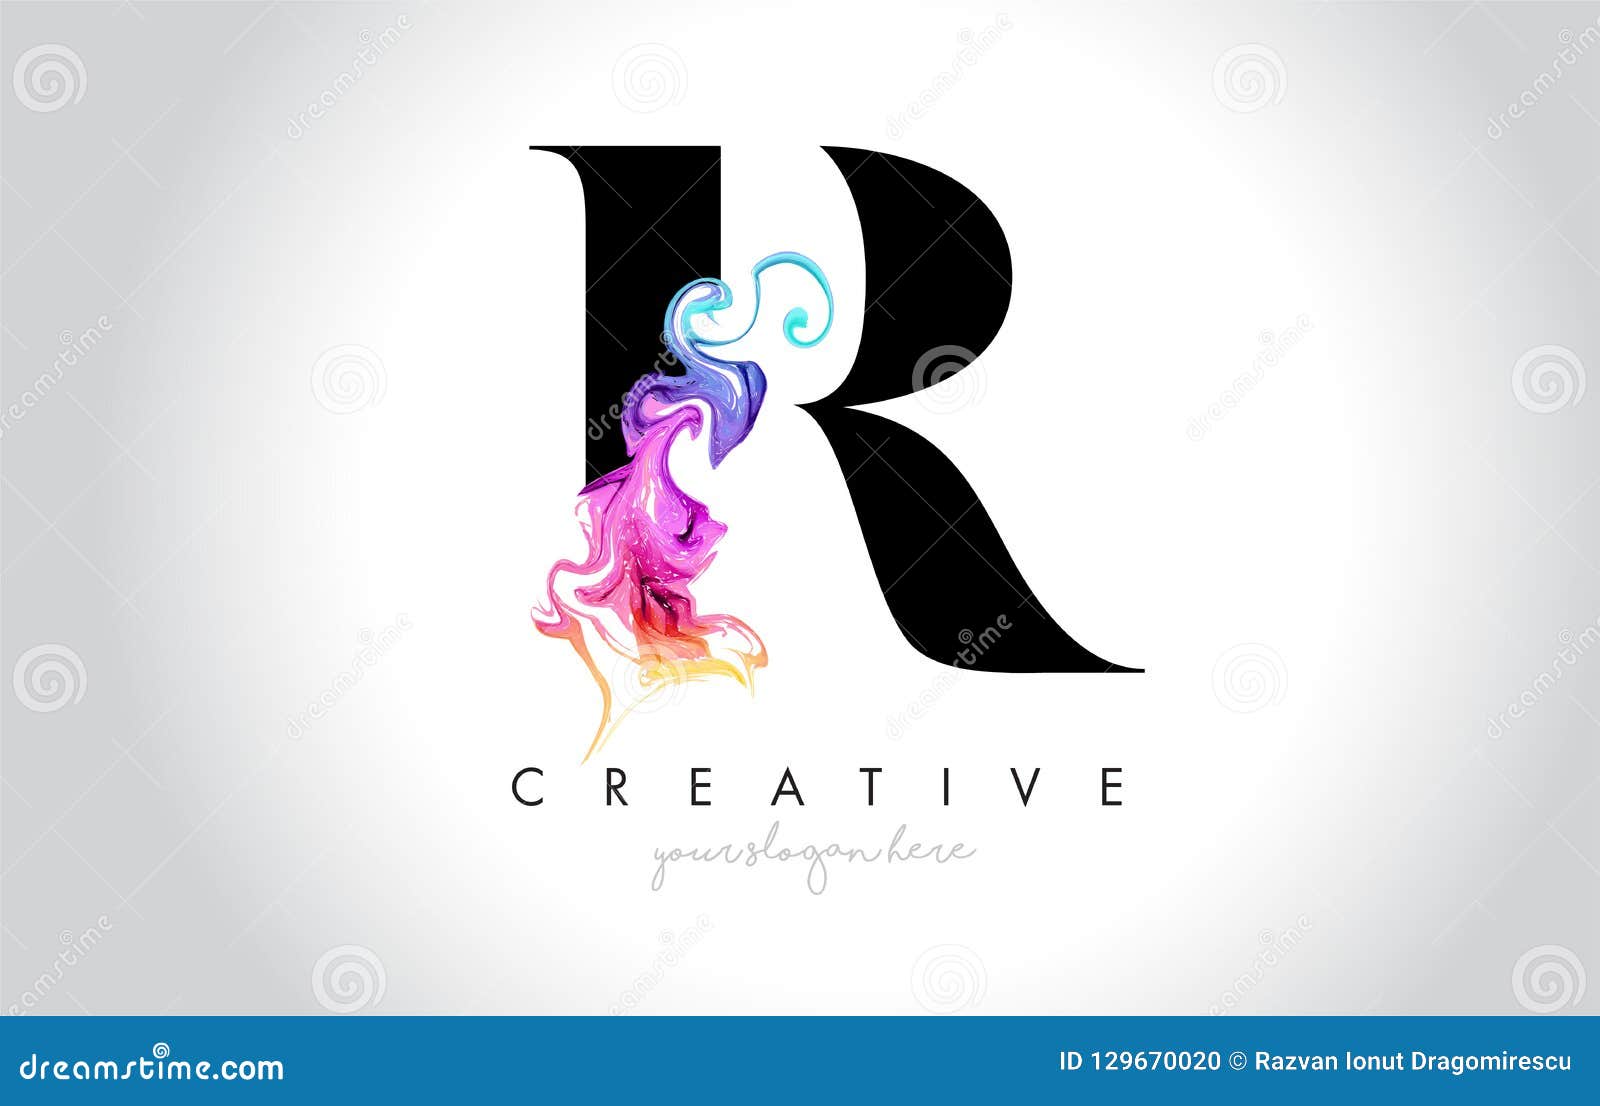 r vibrant creative leter logo  with colorful smoke ink flo